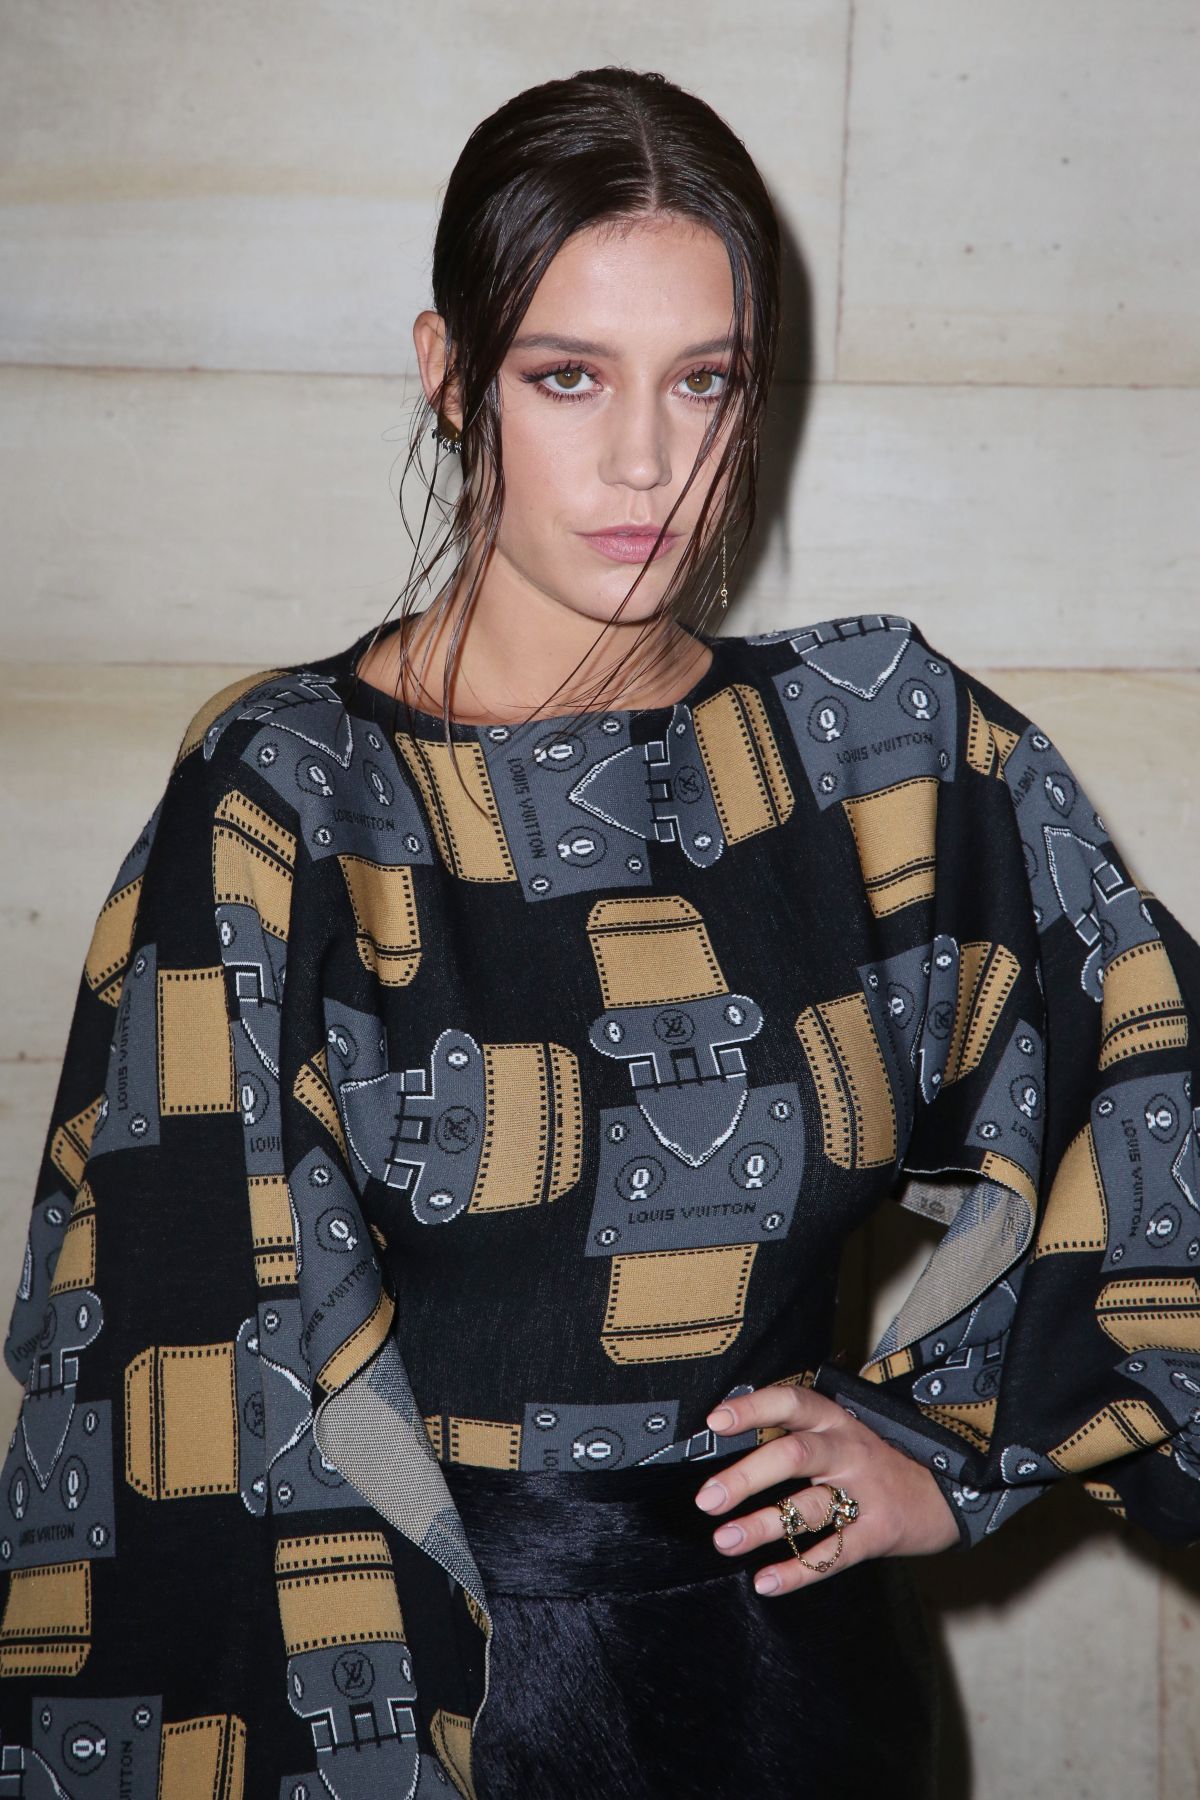 Adele Exarchopoulos Louis Vuitton number (Adele-ExarchopoulosLouis Vuitton  number,.jpg) Image - 23148465 